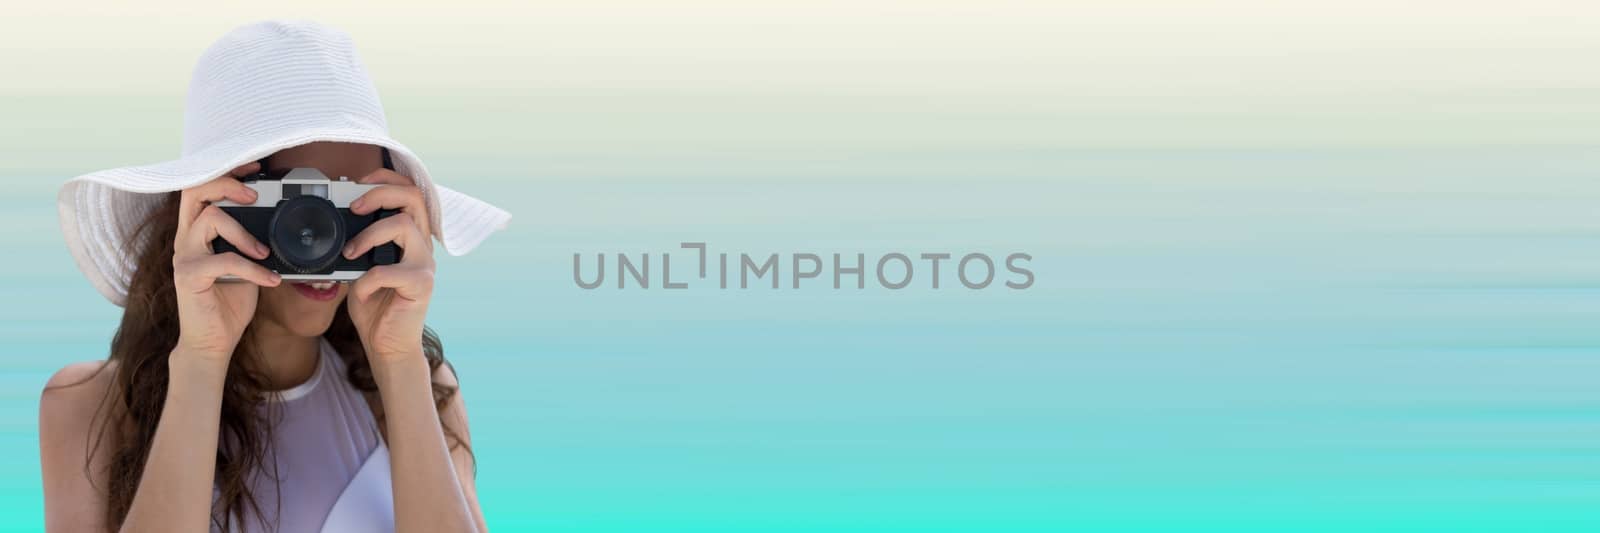 Millennial woman in summer hat with camera against light blue background by Wavebreakmedia